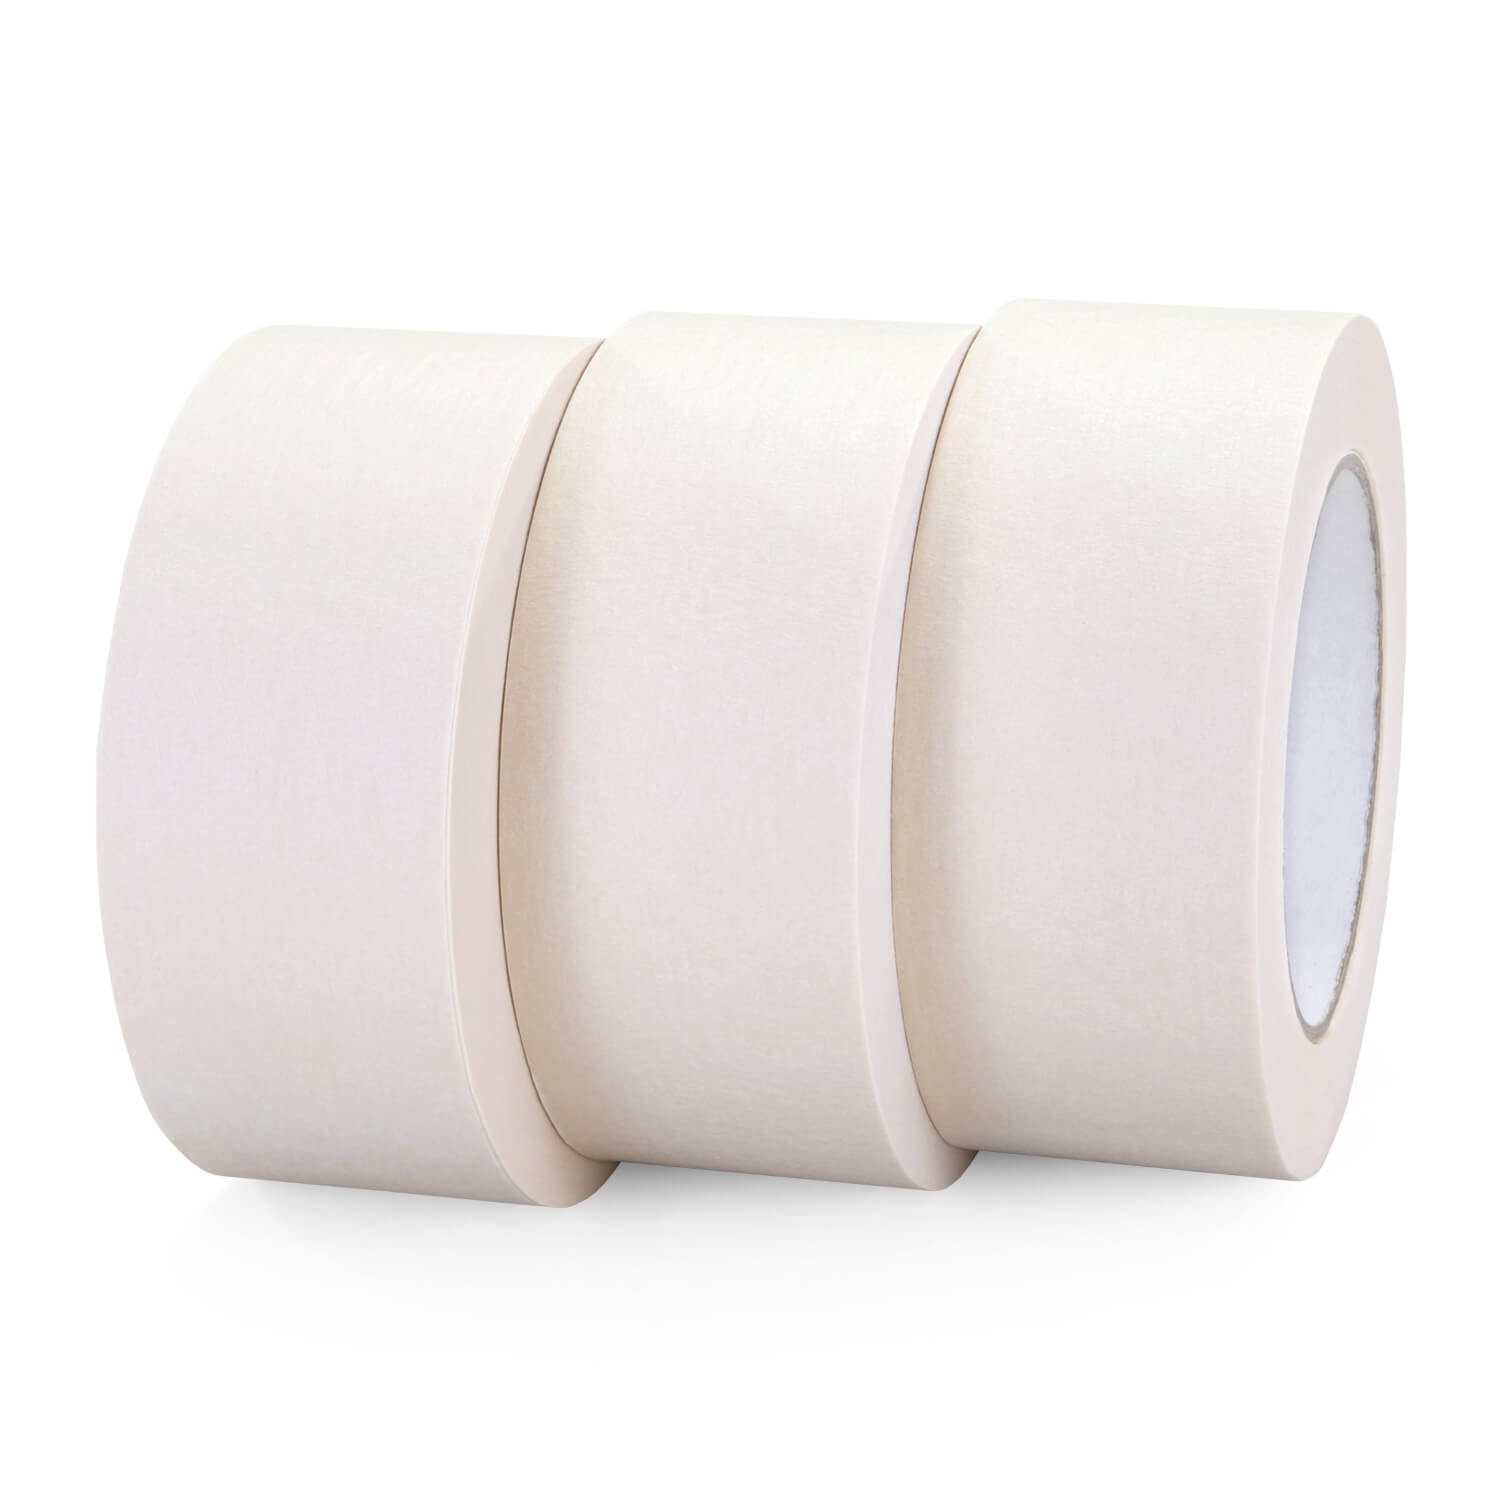 2 x 60 yards White Masking Tape for General Purpose, Natural Rubber buy in  stock in U.S. in IDL Packaging